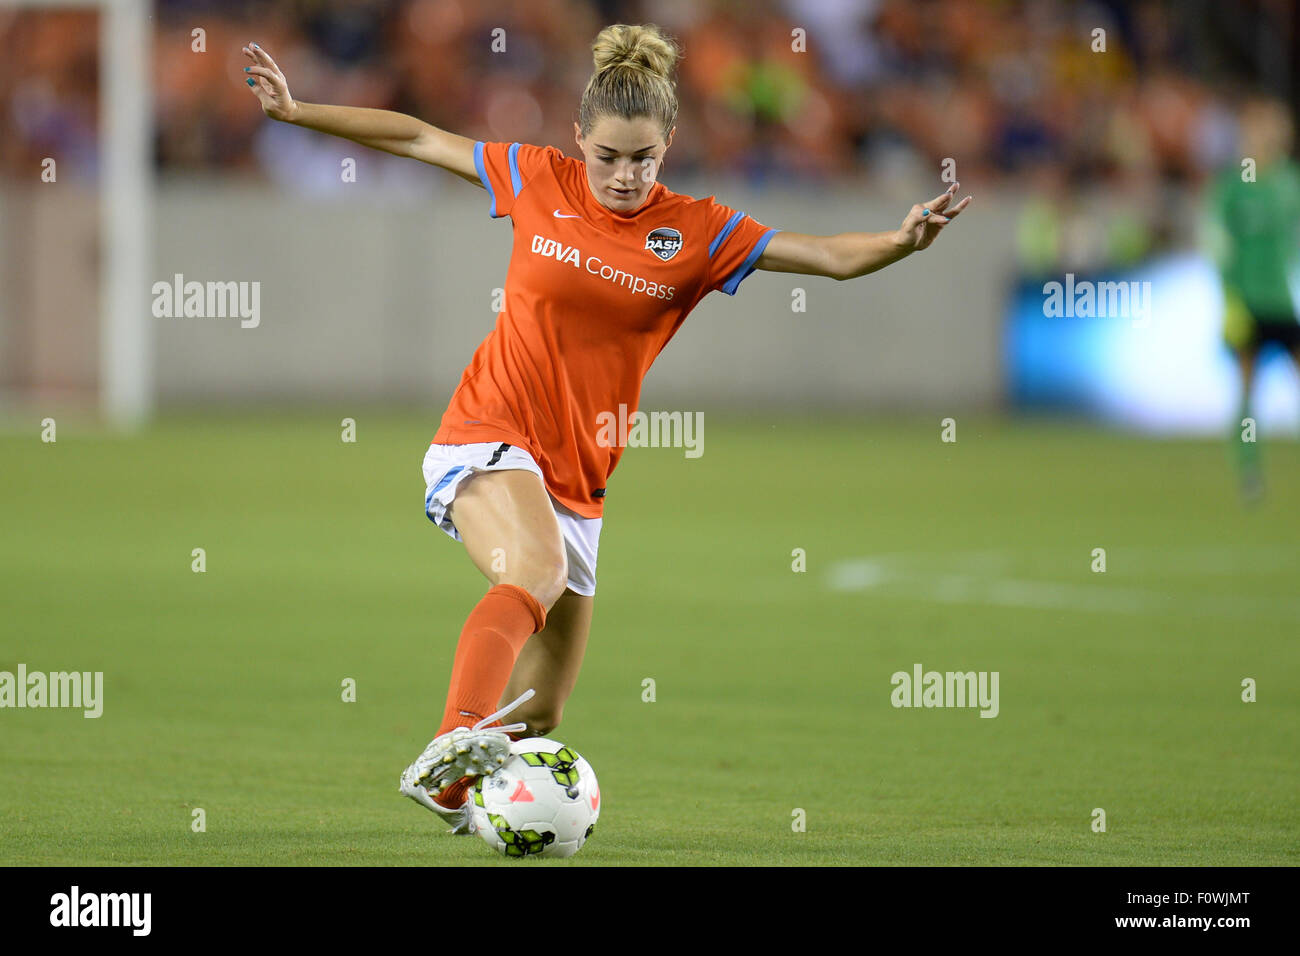 Houston, Texas, USA. 21st Aug, 2015. Houston Dash forward Kealia Ohai (7) controls the ball during the second half of an NWSL game between the Houston Dash and the Seattle Reign at BBVA Compass Stadium in Houston, TX on August 21st, 2015. The Reign won 3-0. © Trask Smith/ZUMA Wire/Alamy Live News Stock Photo